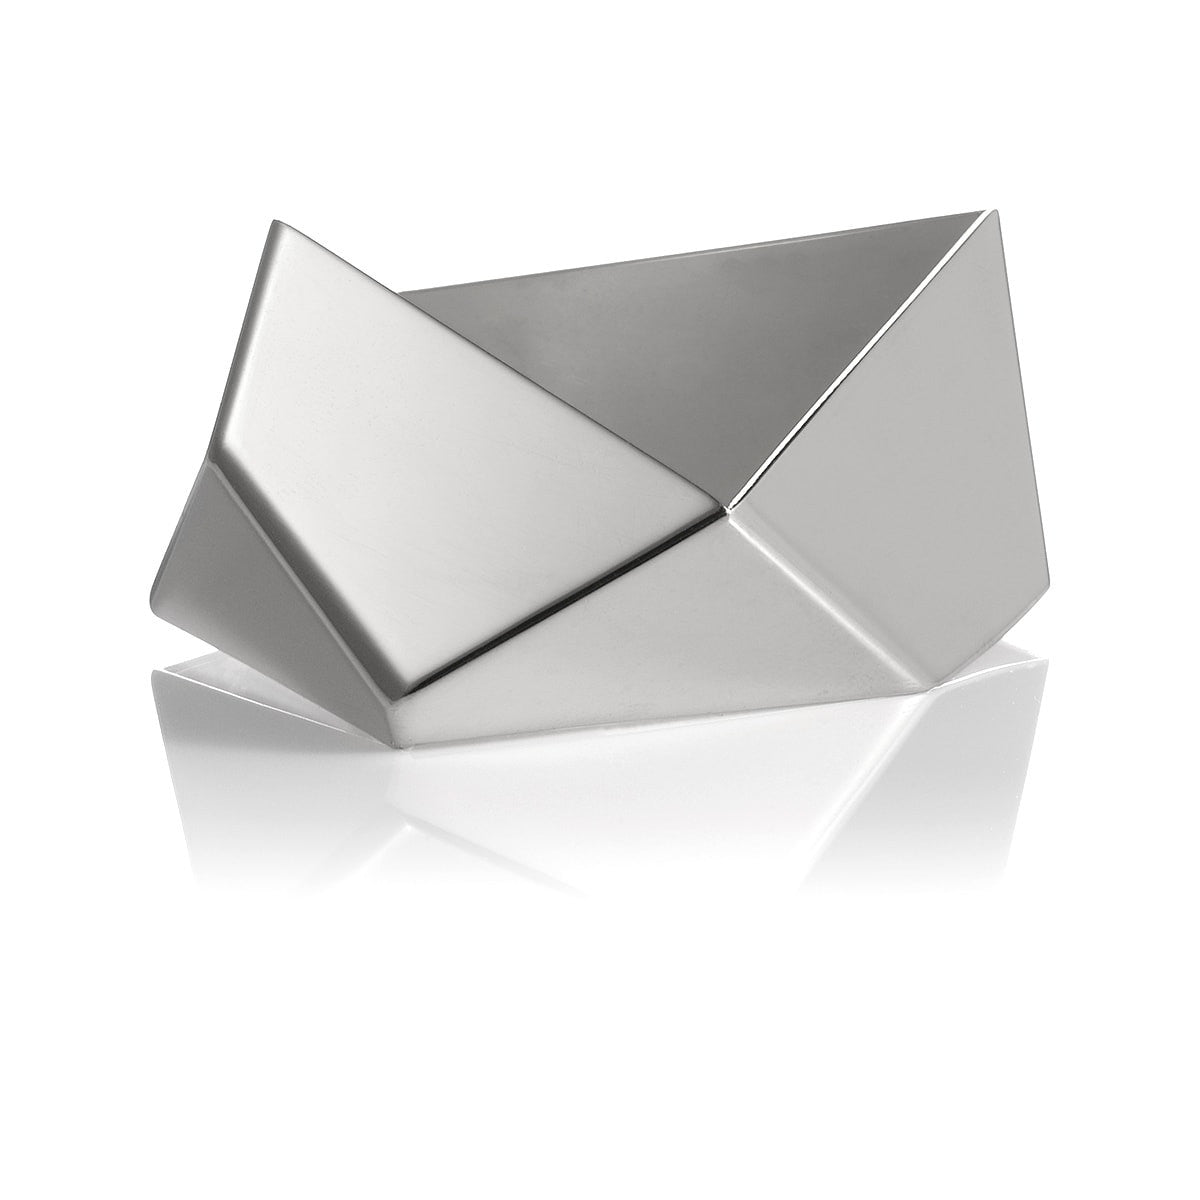 Striking, chunky statement bangle bracelet from iconic Facet collection.  Material: 925 silver.